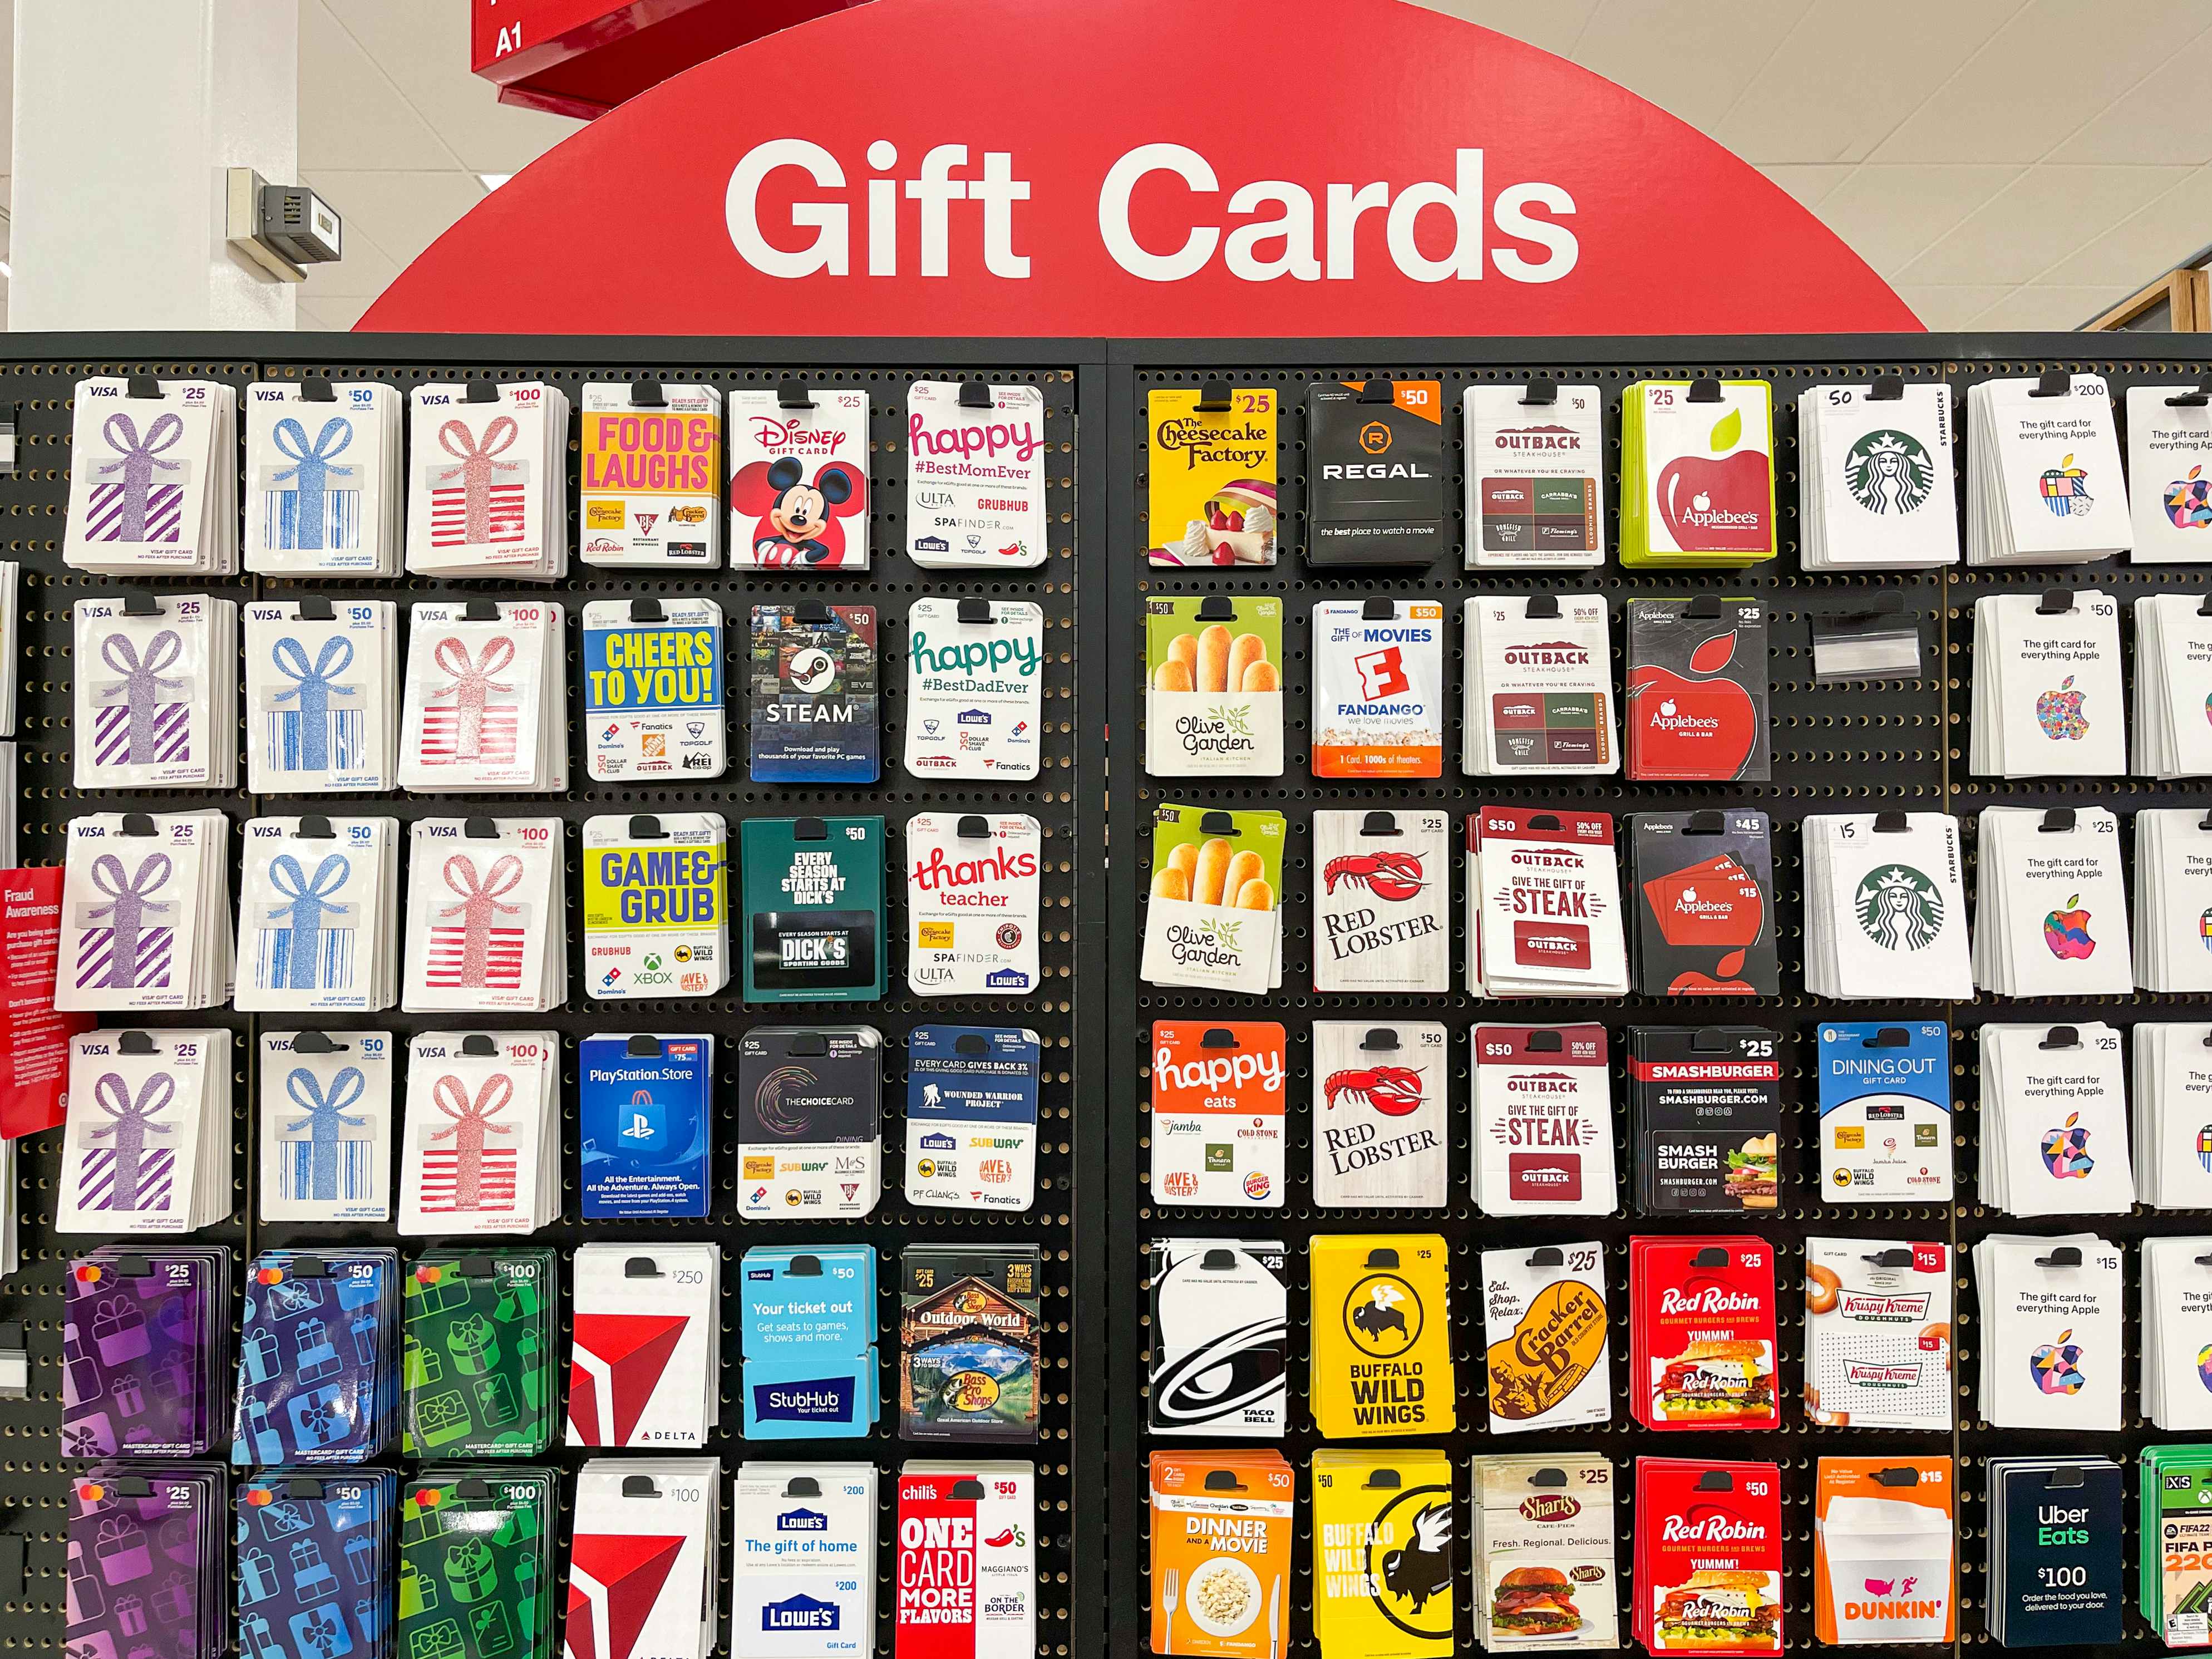 Gamestop $15-$500 Gift Card, 1 ct - Fry's Food Stores